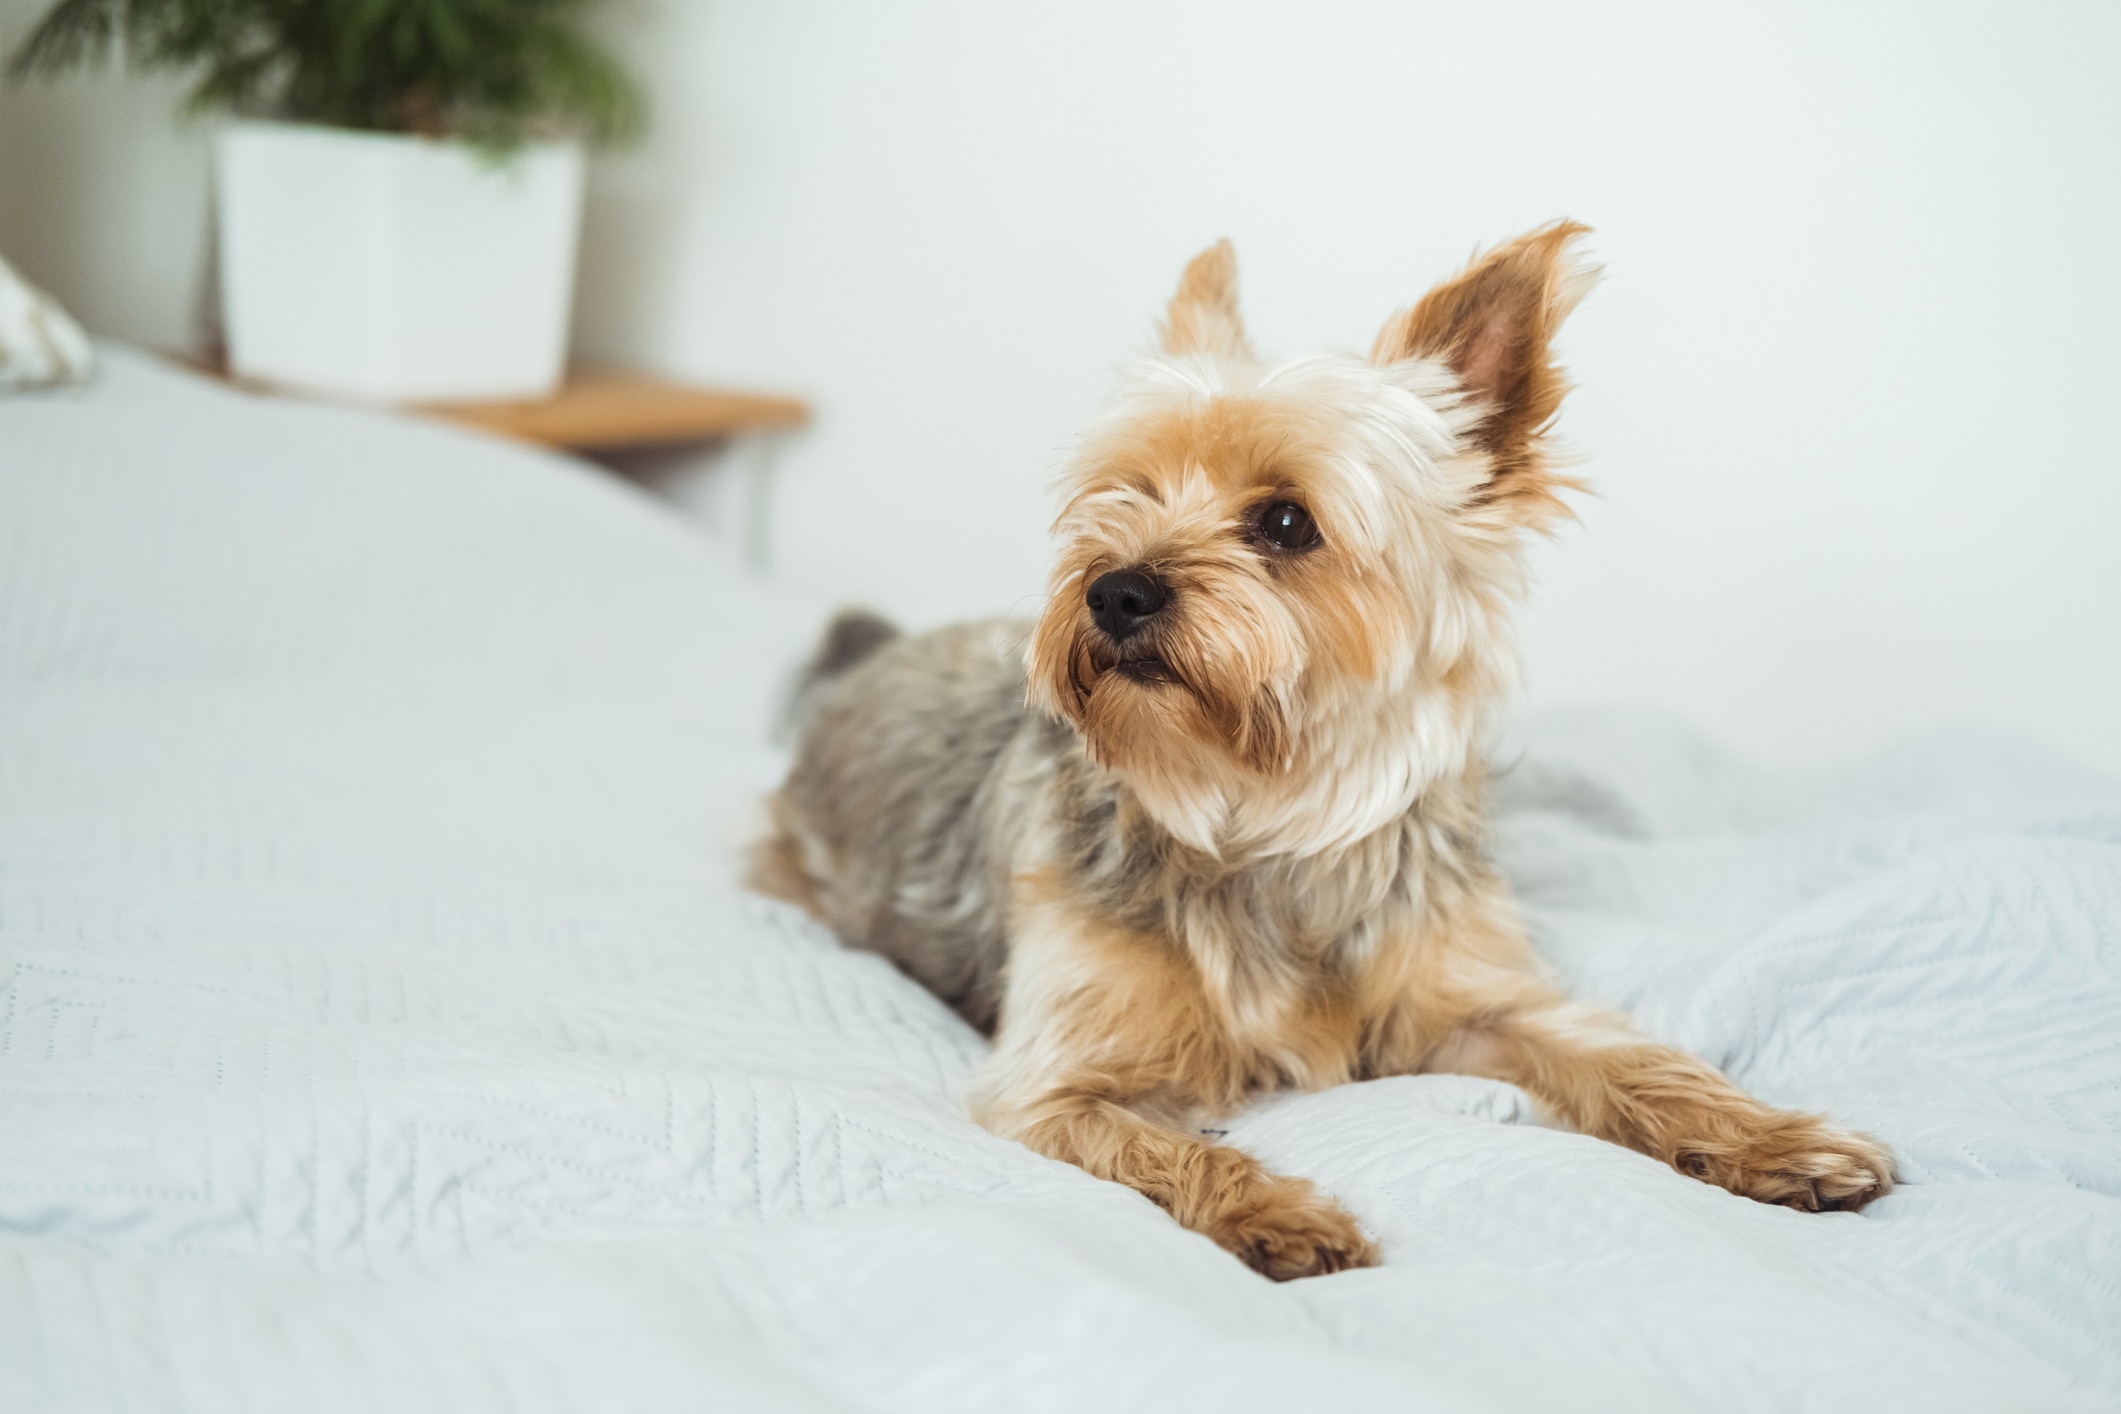 yorkie with a puppy haircut lying on a bed of white sheets